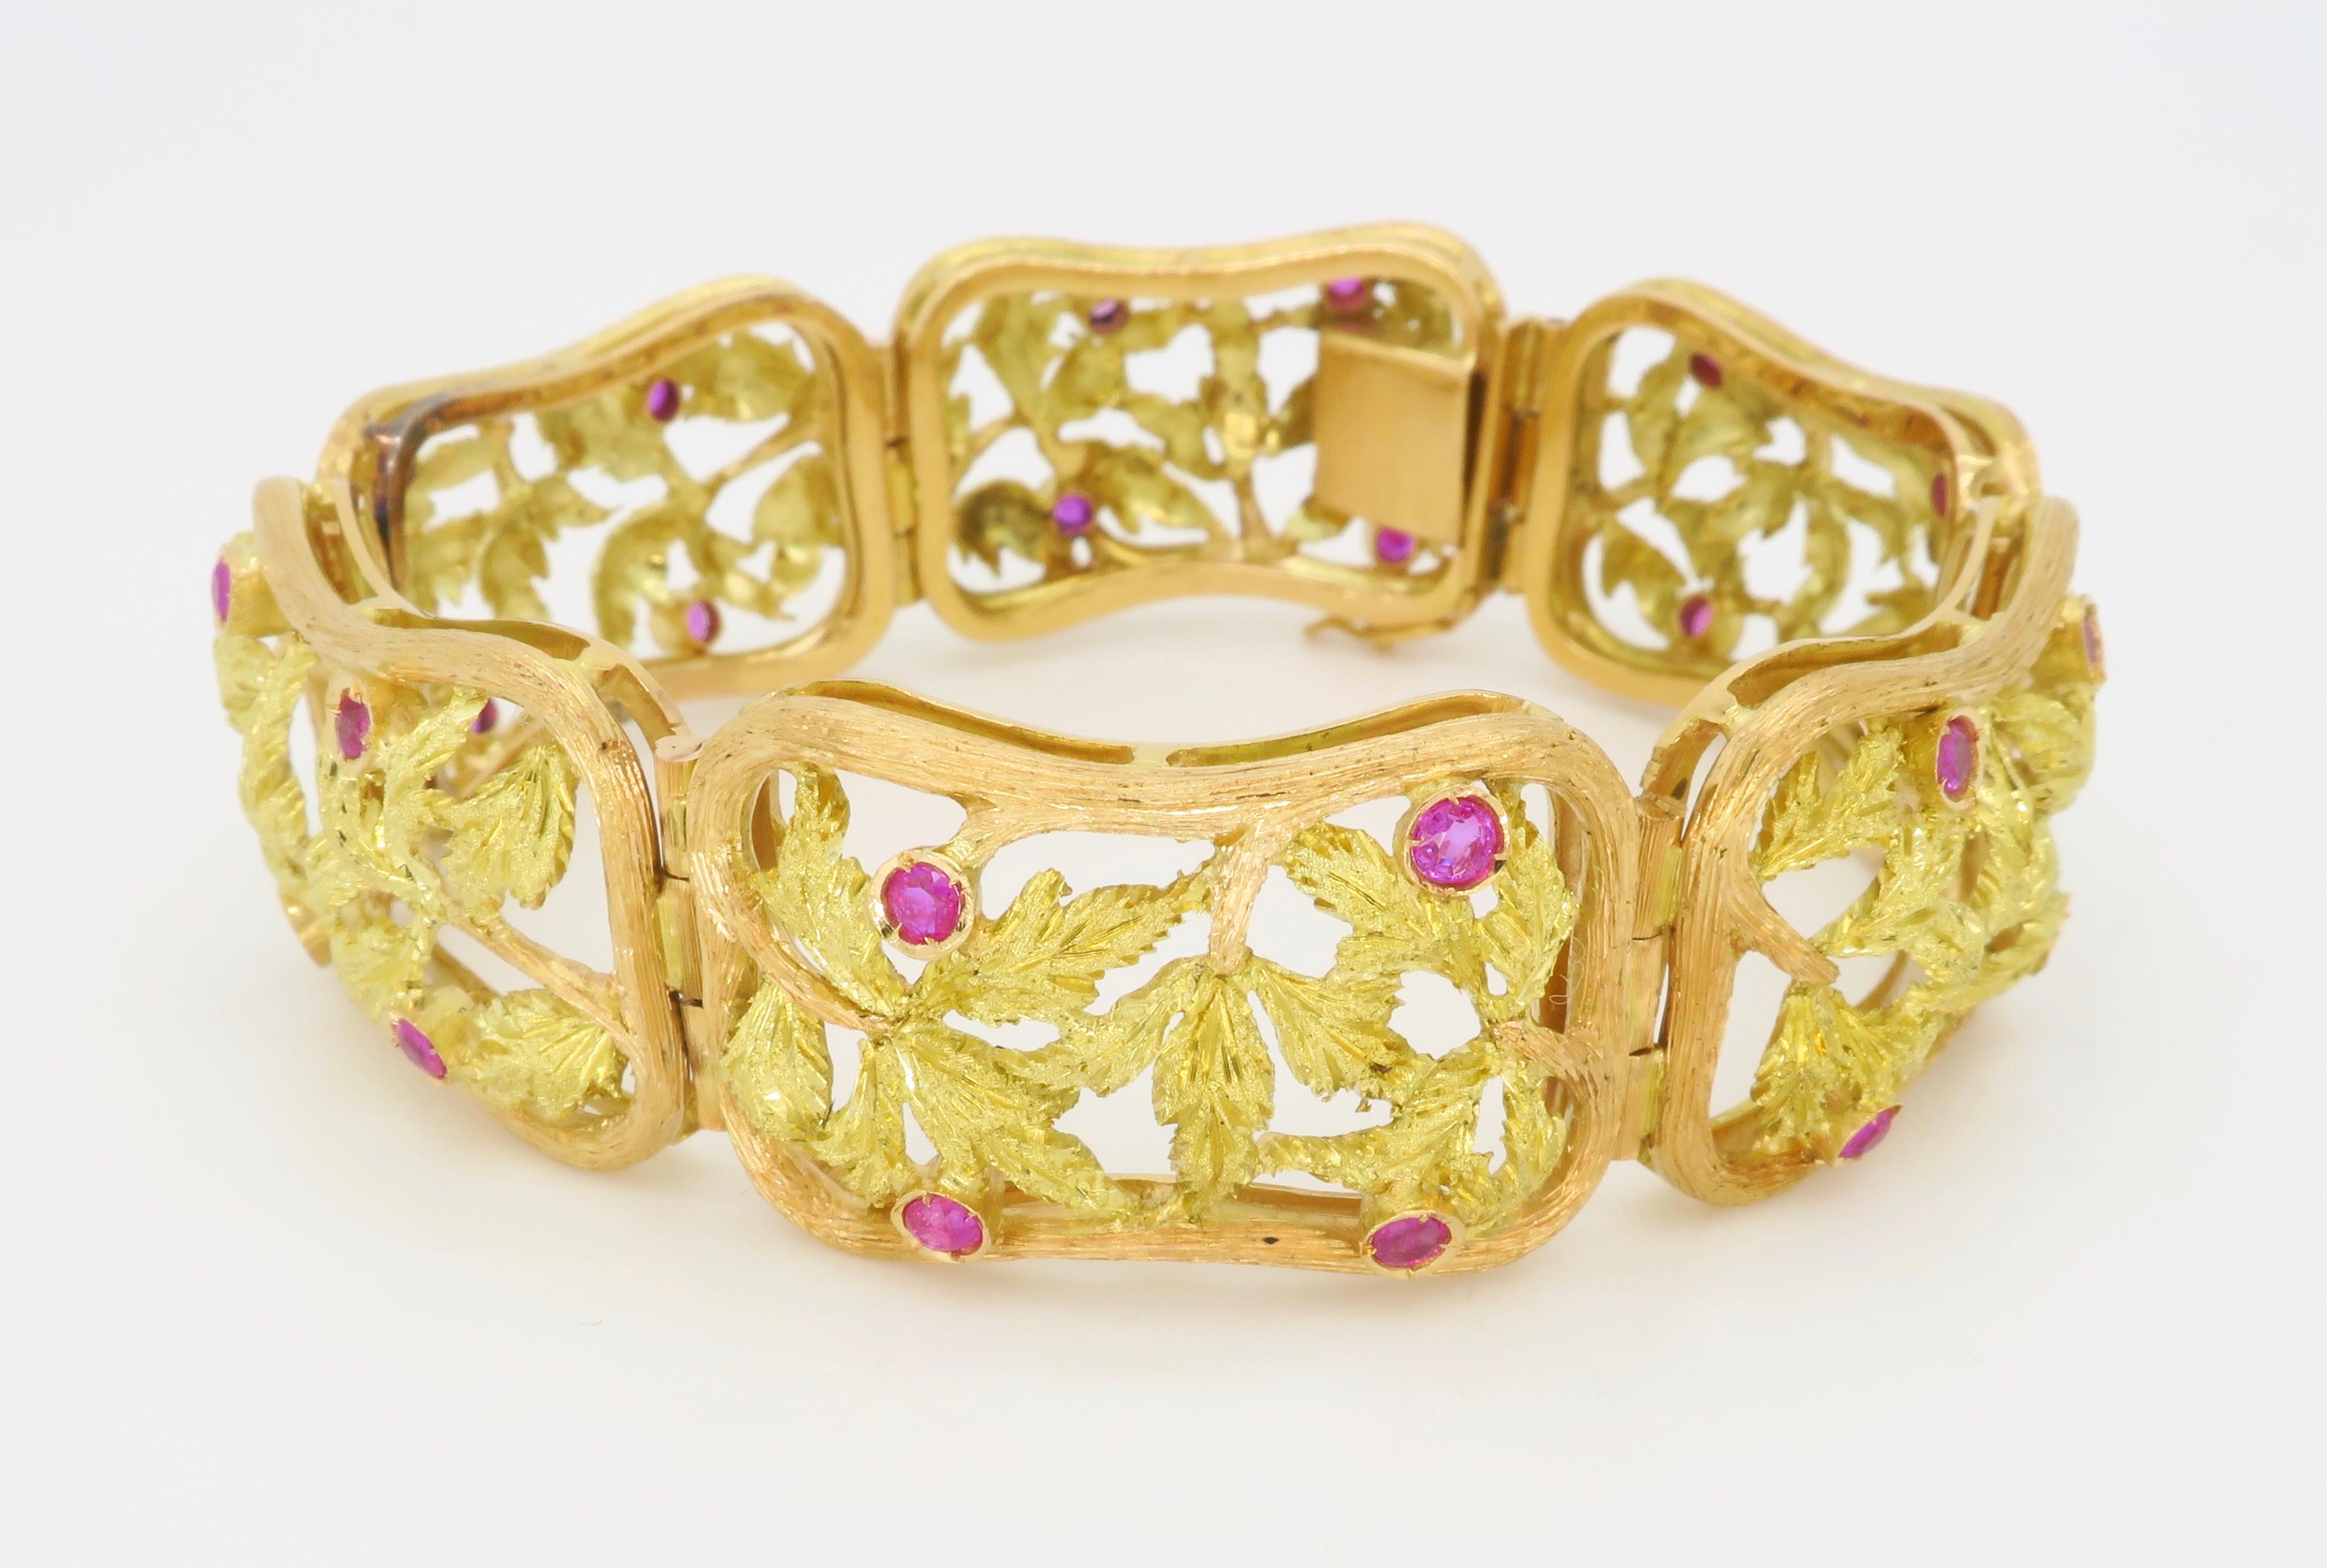 Impressive Yellow & Green Gold Bracelet Crafted with Rubies 5